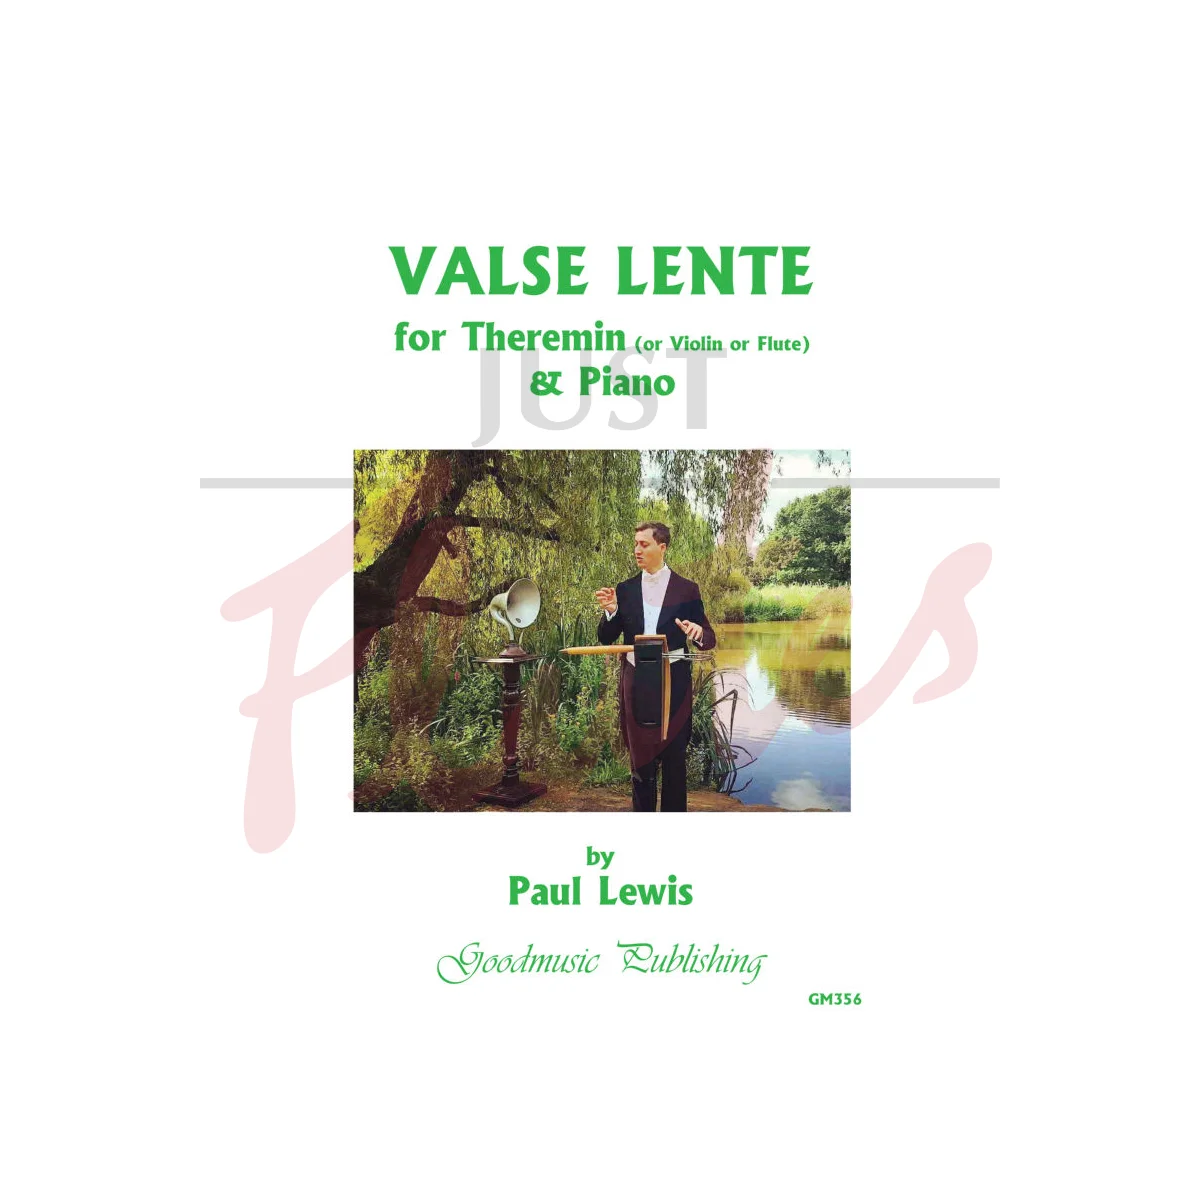 Valse Lente for Flute/Theremin/Violin and Piano